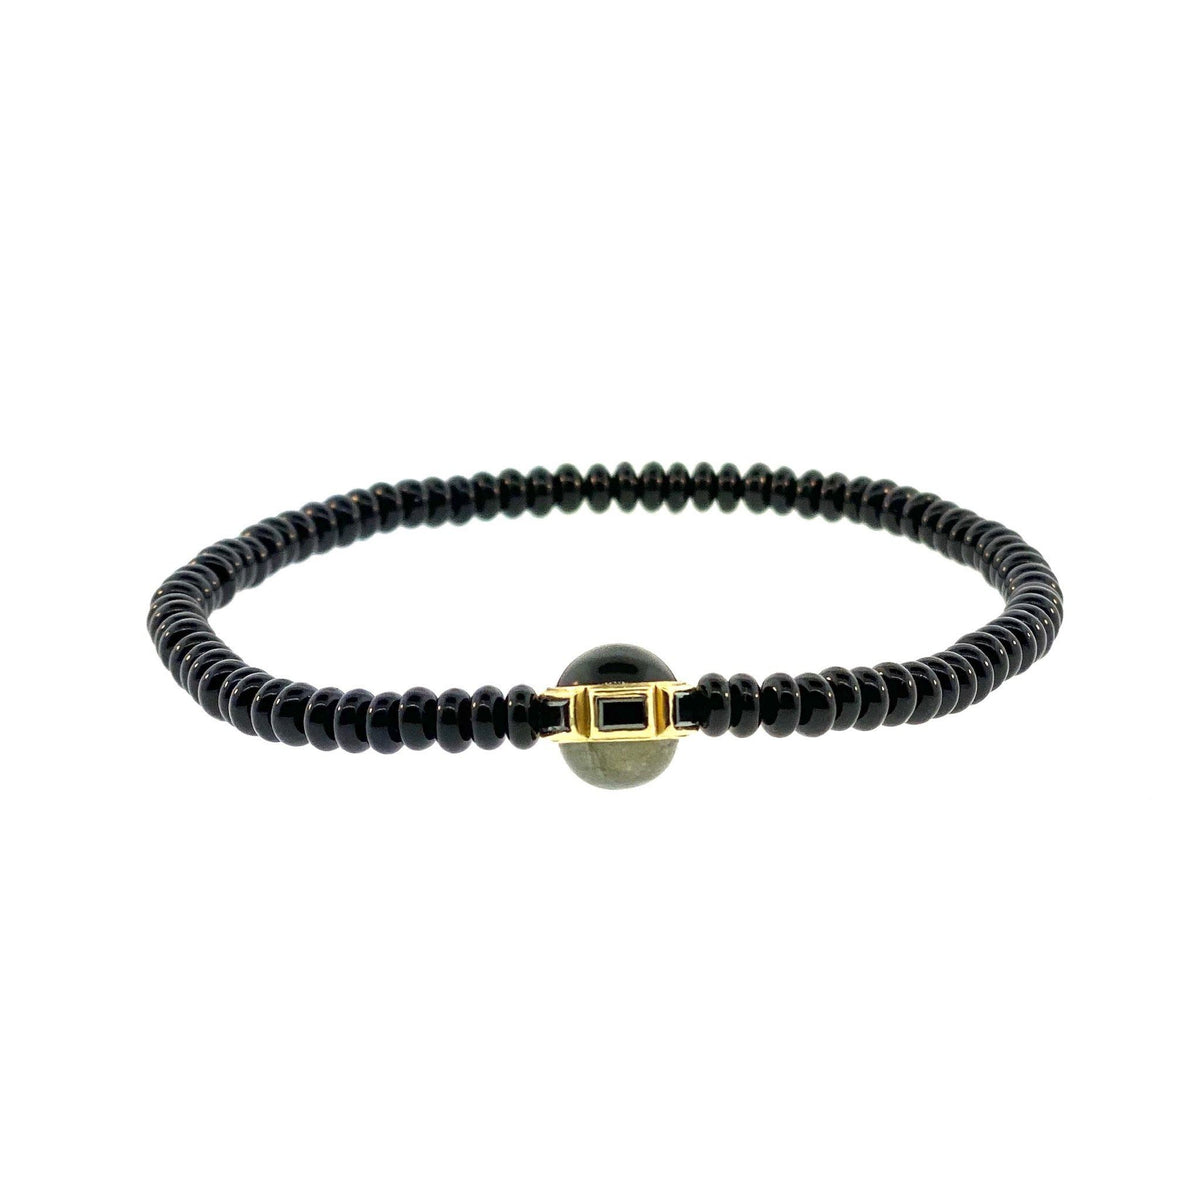 GOLD COLLAR WITH BLACK DIAMOND BAGUETTES, ONYX AND LABRADORITE CABACHONS ON GEMSTONE BEADED Marie France Van Damme 